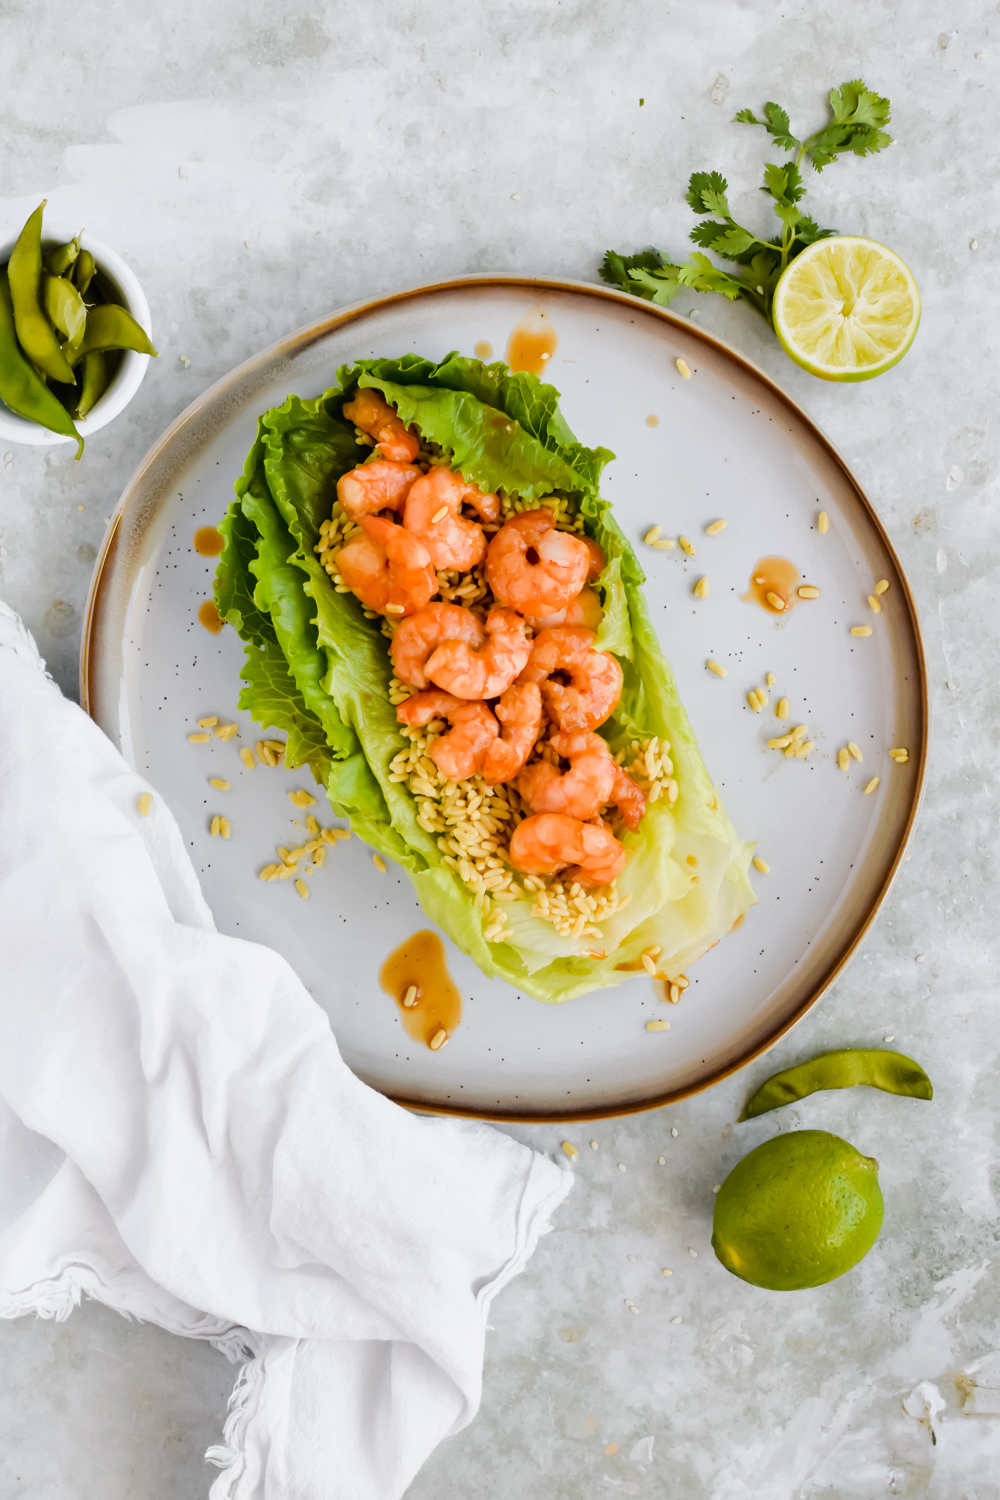 two large slices of romaine lettuce filled with rice and honey teriyaki shrimp on white plate on gray background.